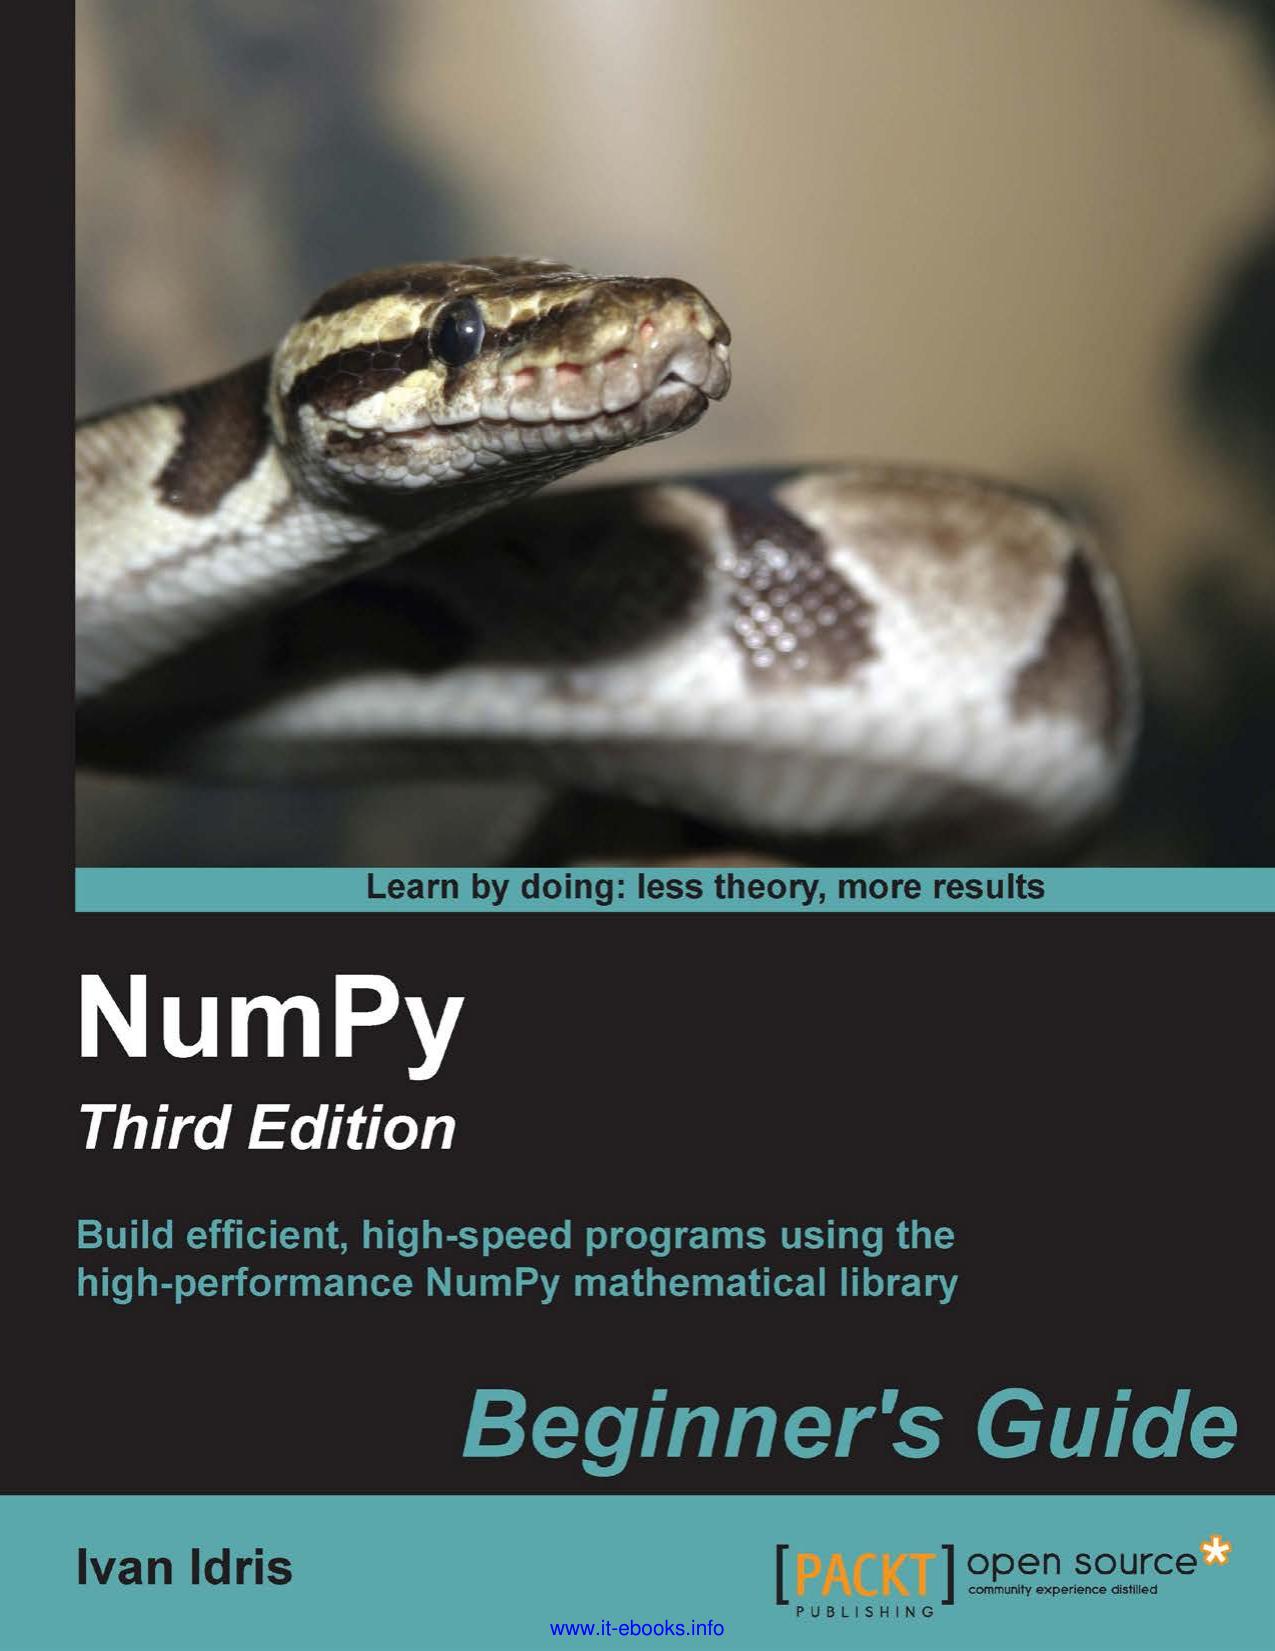 NumPy: Beginner's Guide - Third Edition